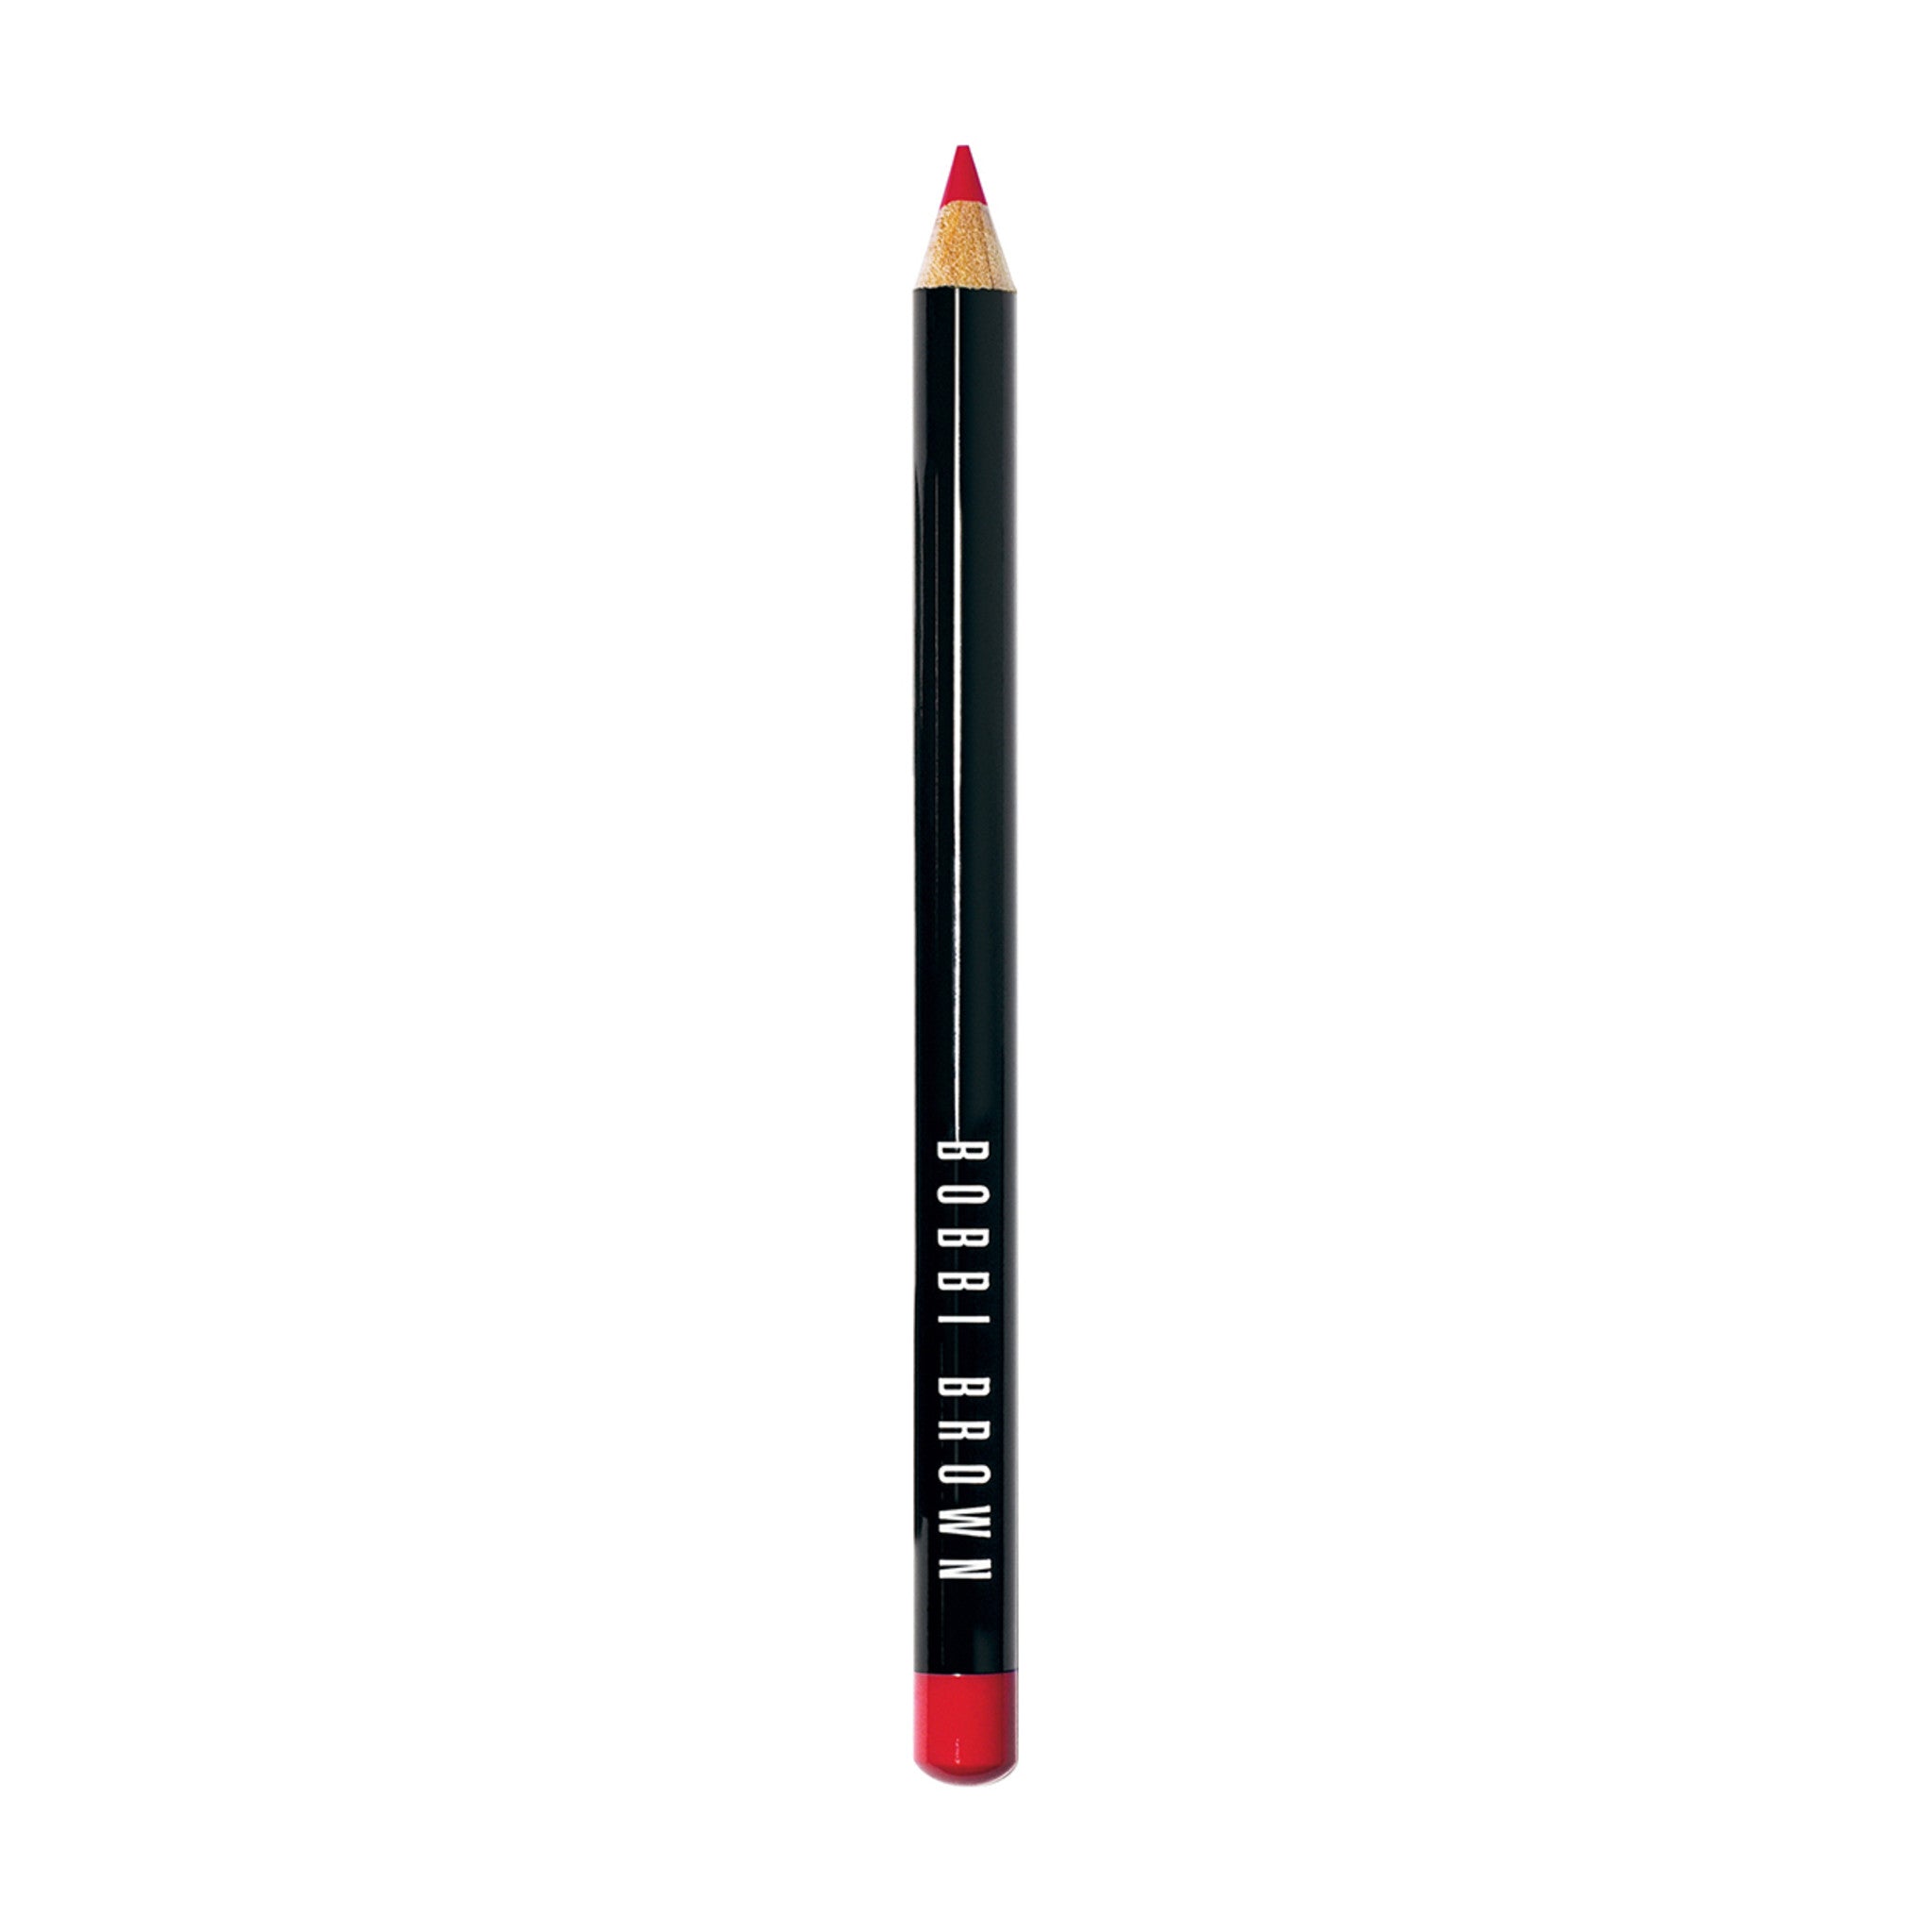 Bobbi Brown Lip Pencil Color/Shade variant: Crystal main image. This product is in the color red